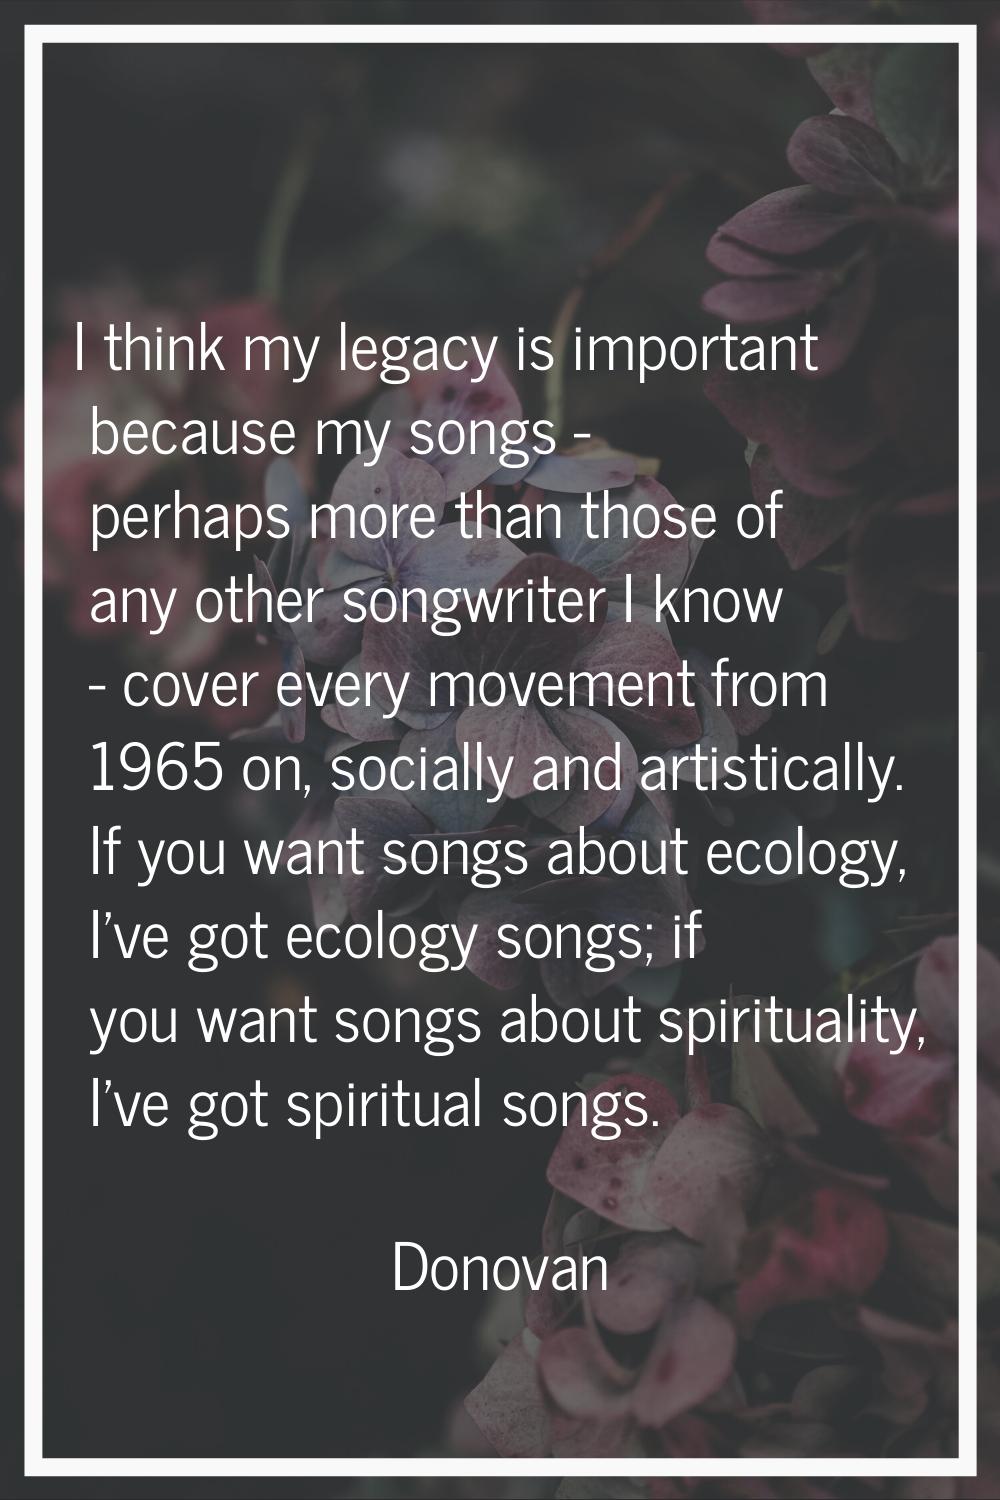 I think my legacy is important because my songs - perhaps more than those of any other songwriter I